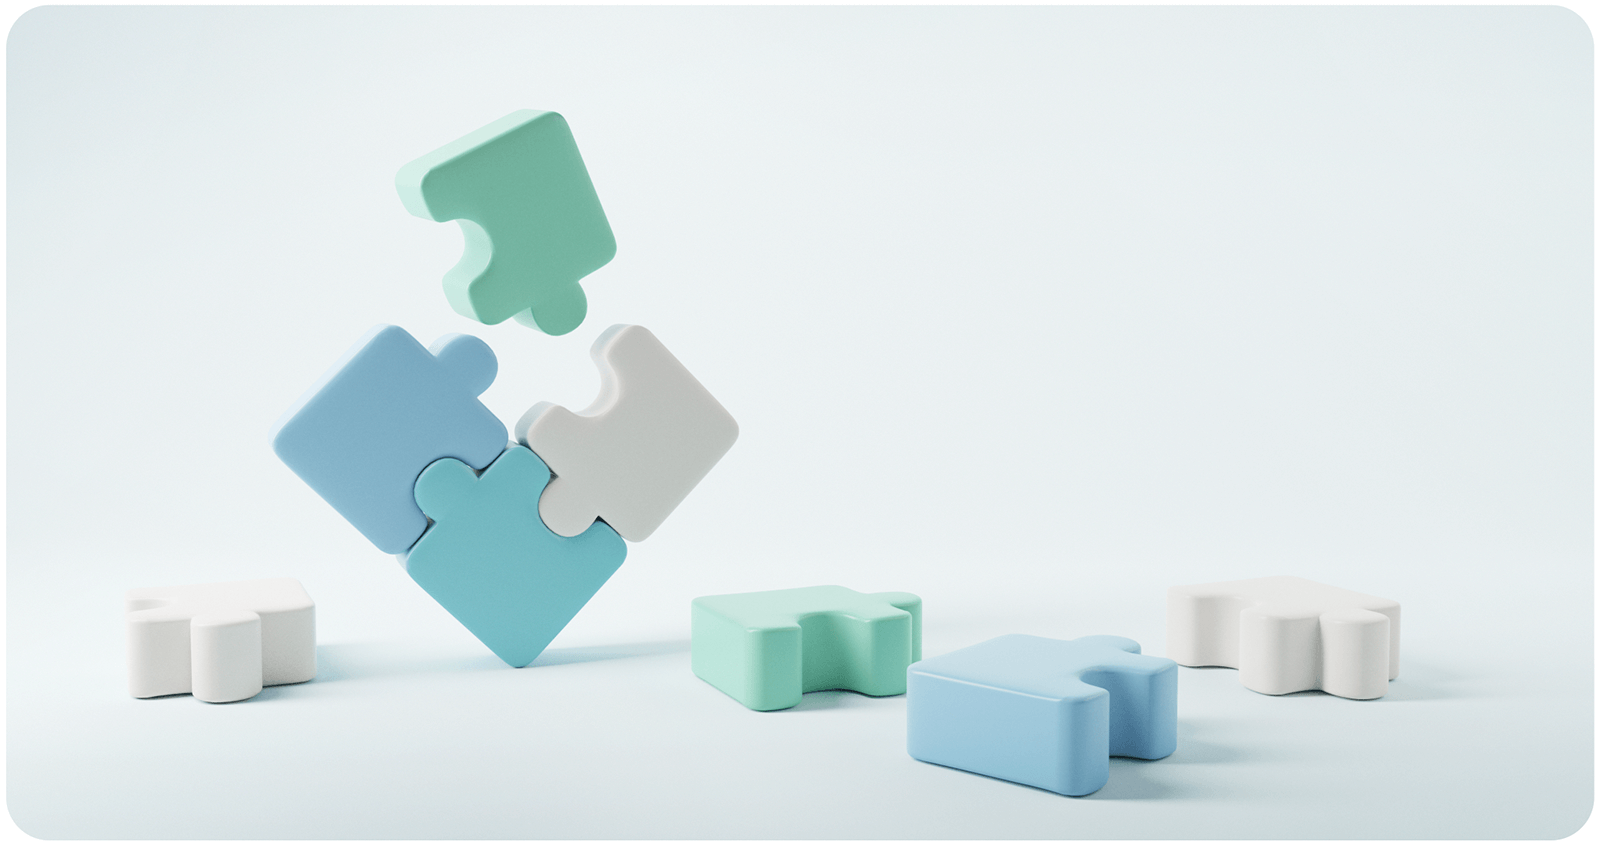 Cartoonish, 3D rendering of puzzle pieces scattered on a nondescript surface.